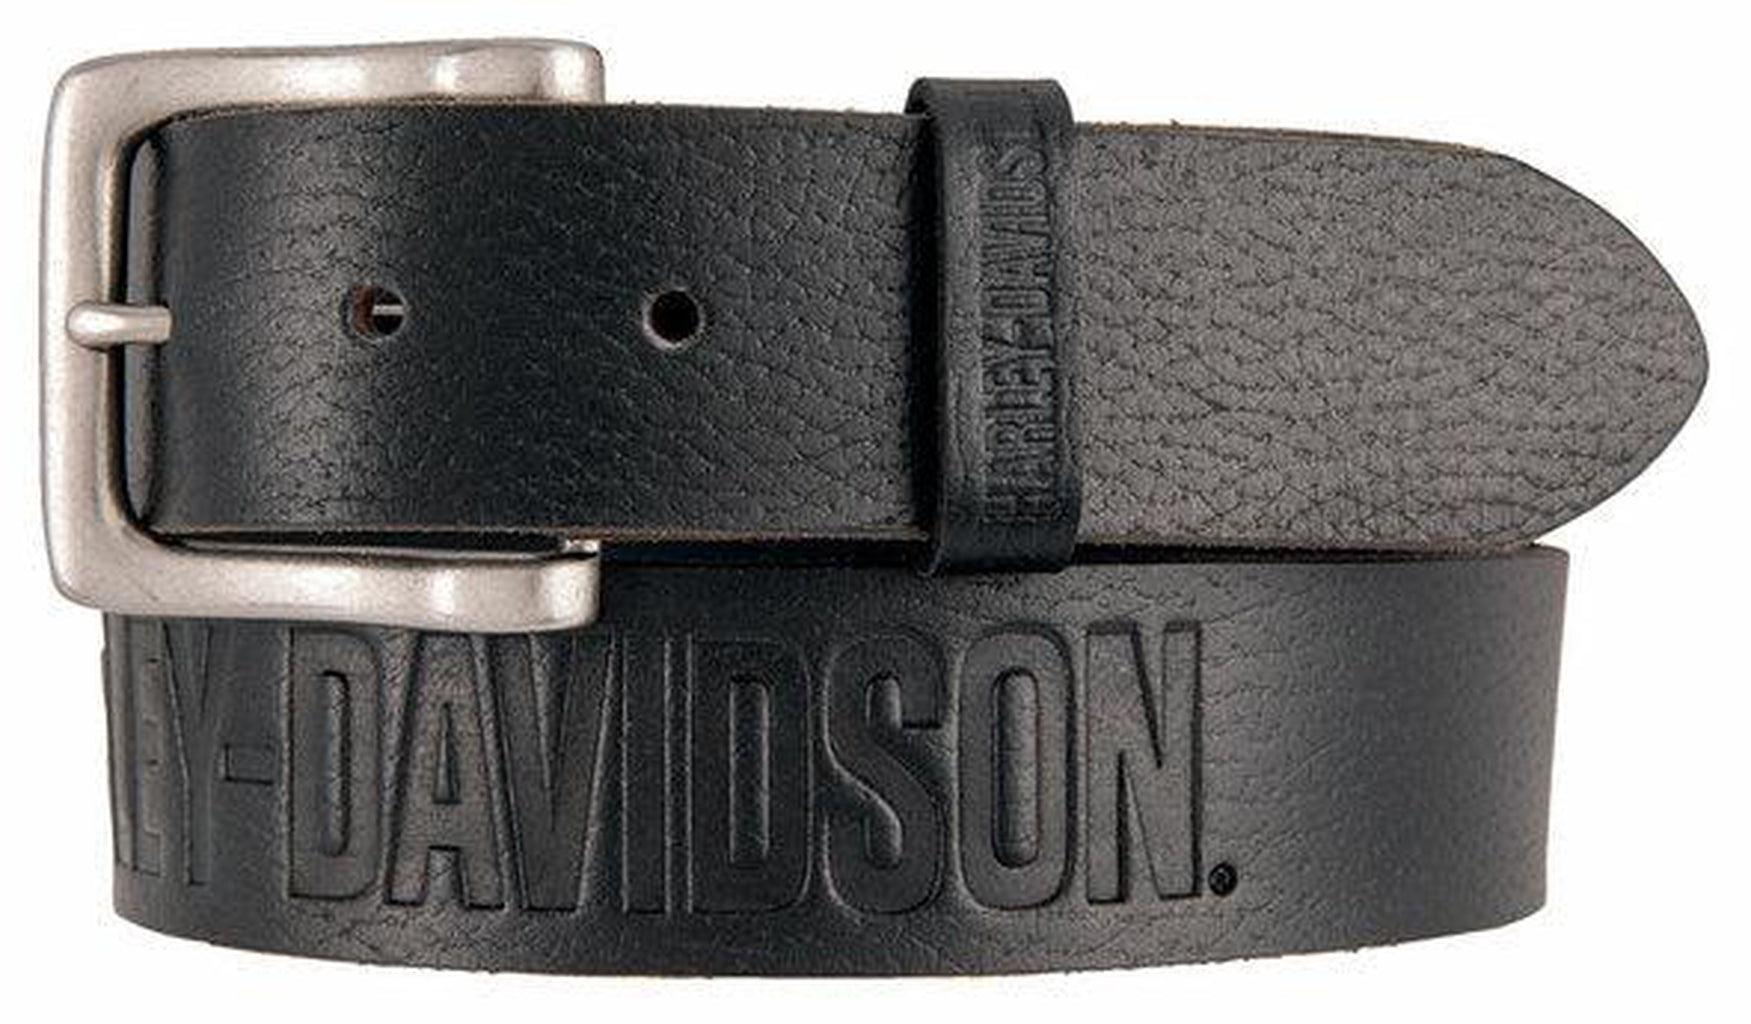 Harley® Men's and Women's Belts and Buckles – Auckland Harley-Davidson